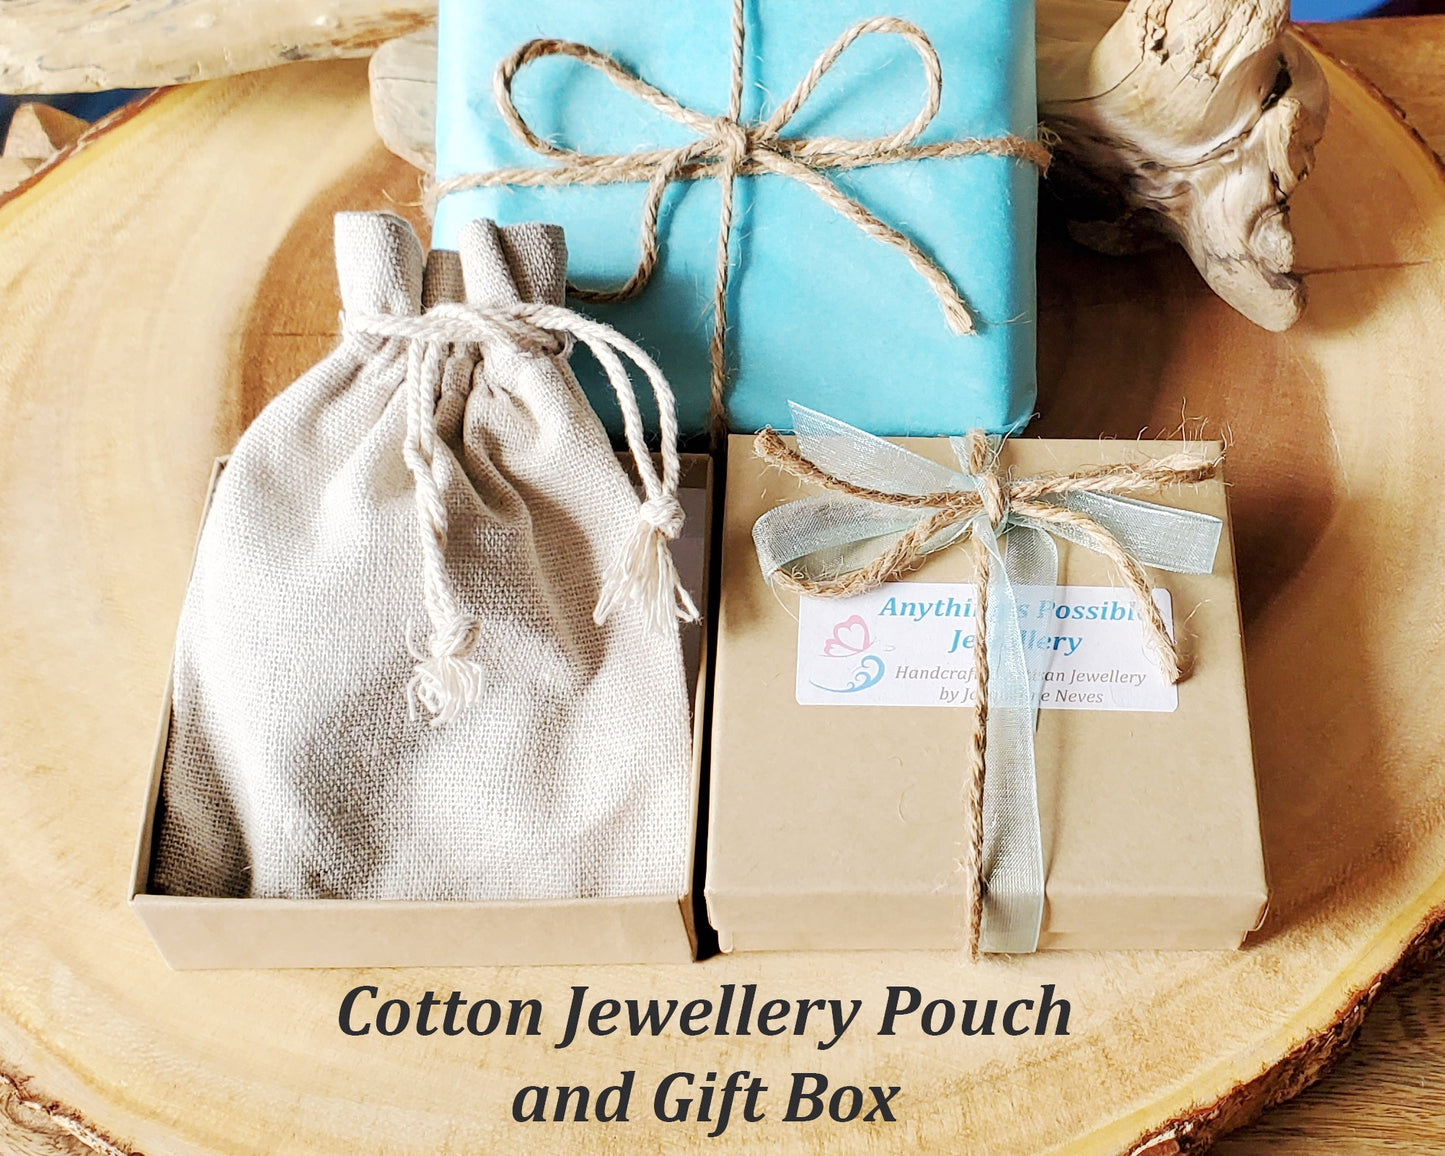  Eco Friendlier Recycled Paper Gift Box, Reusable Cotton Jewellery Pouch, Tissue Paper, Ribbon and Twine